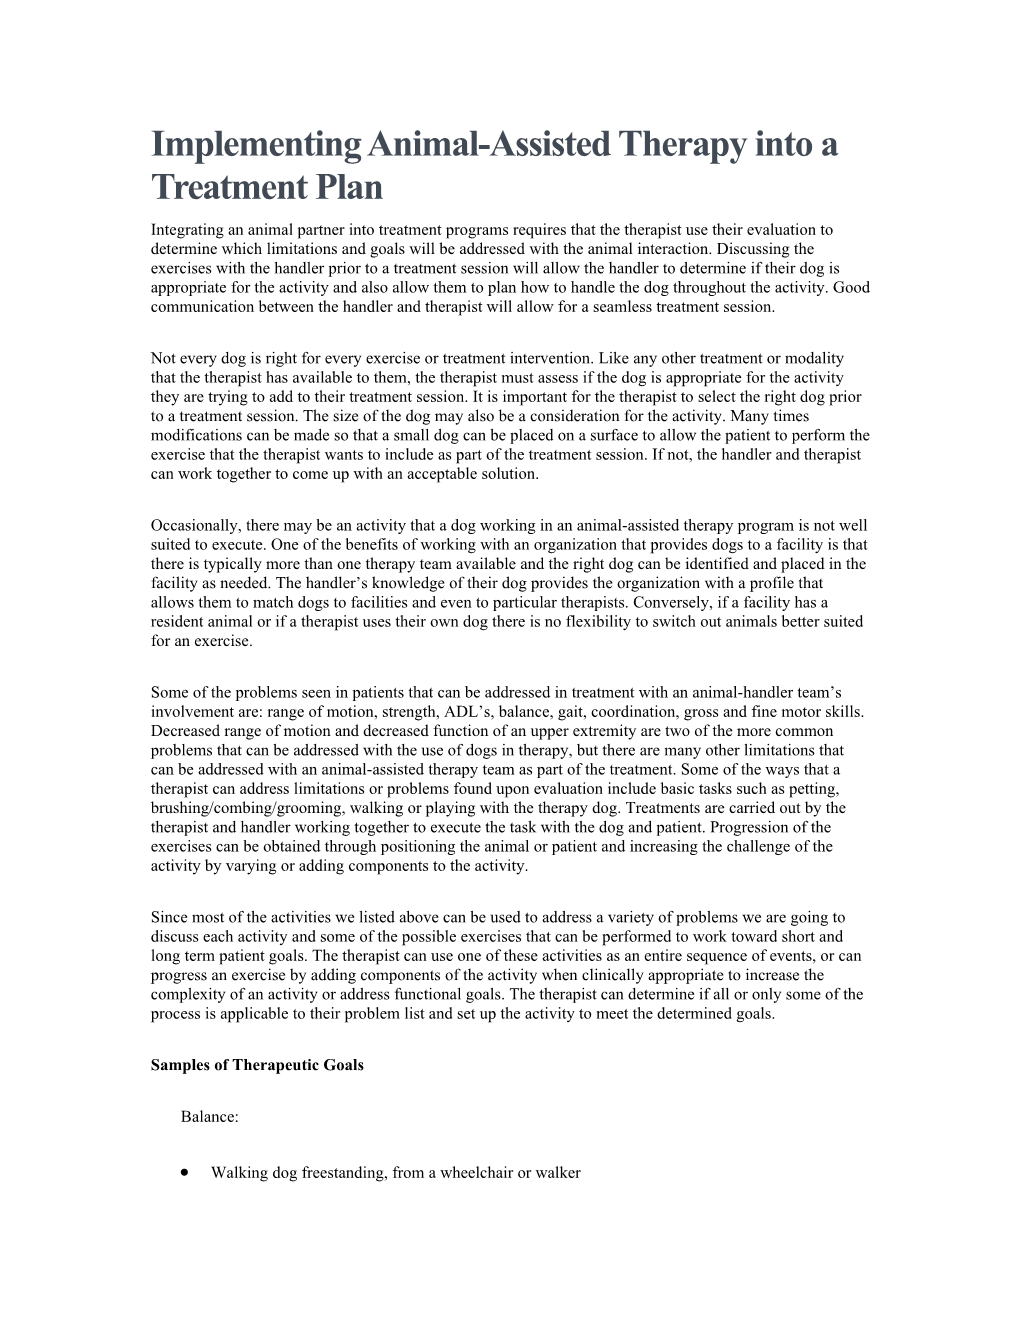 Implementing Animal-Assisted Therapy Into a Treatment Plan